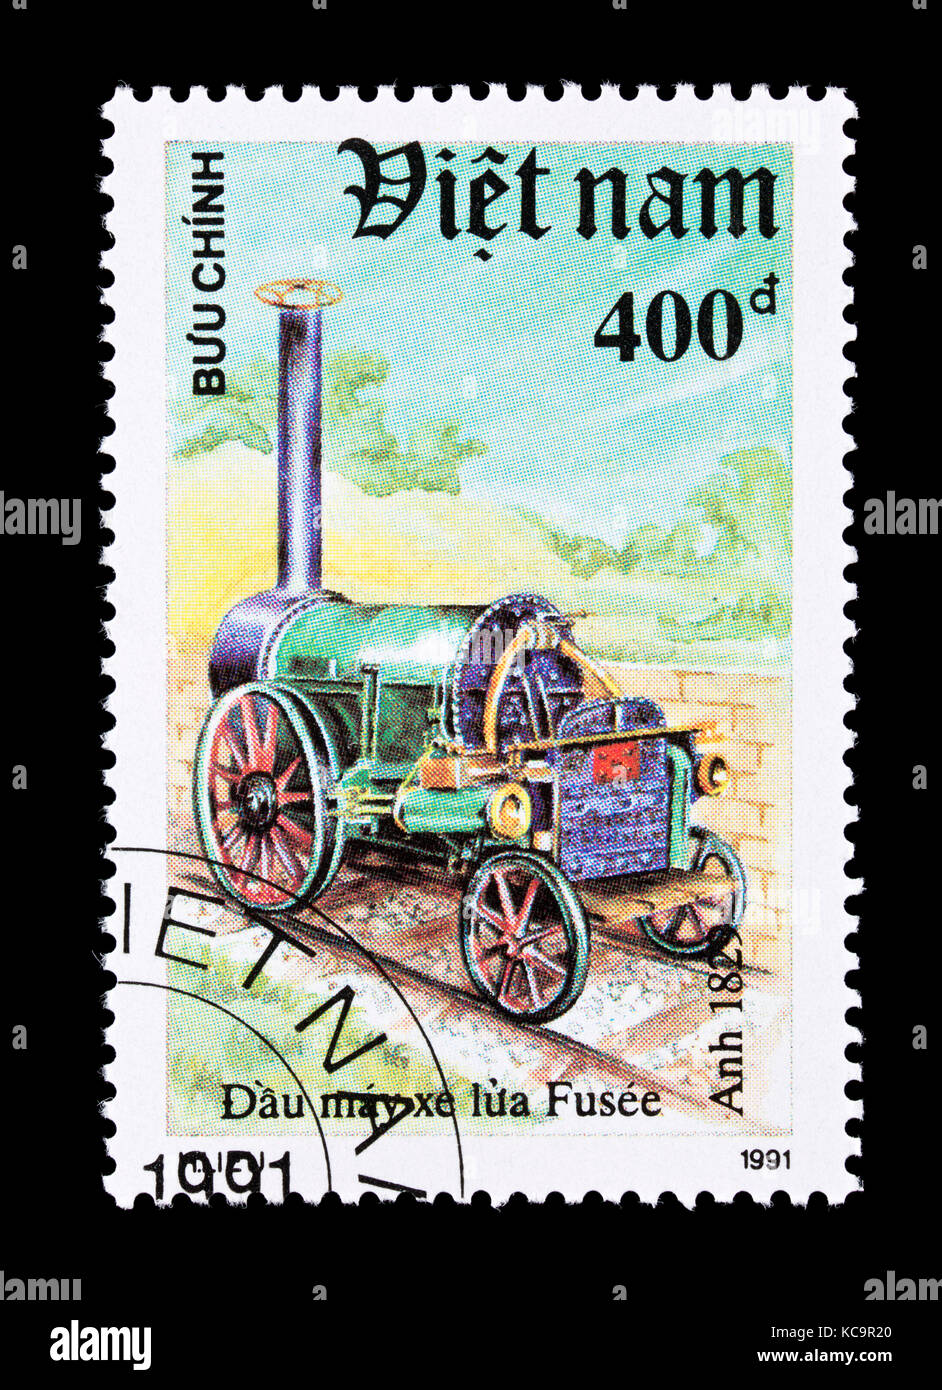 Postage stamp from Vietnam depicting the Puffing Billy early steam locomotive. Stock Photo